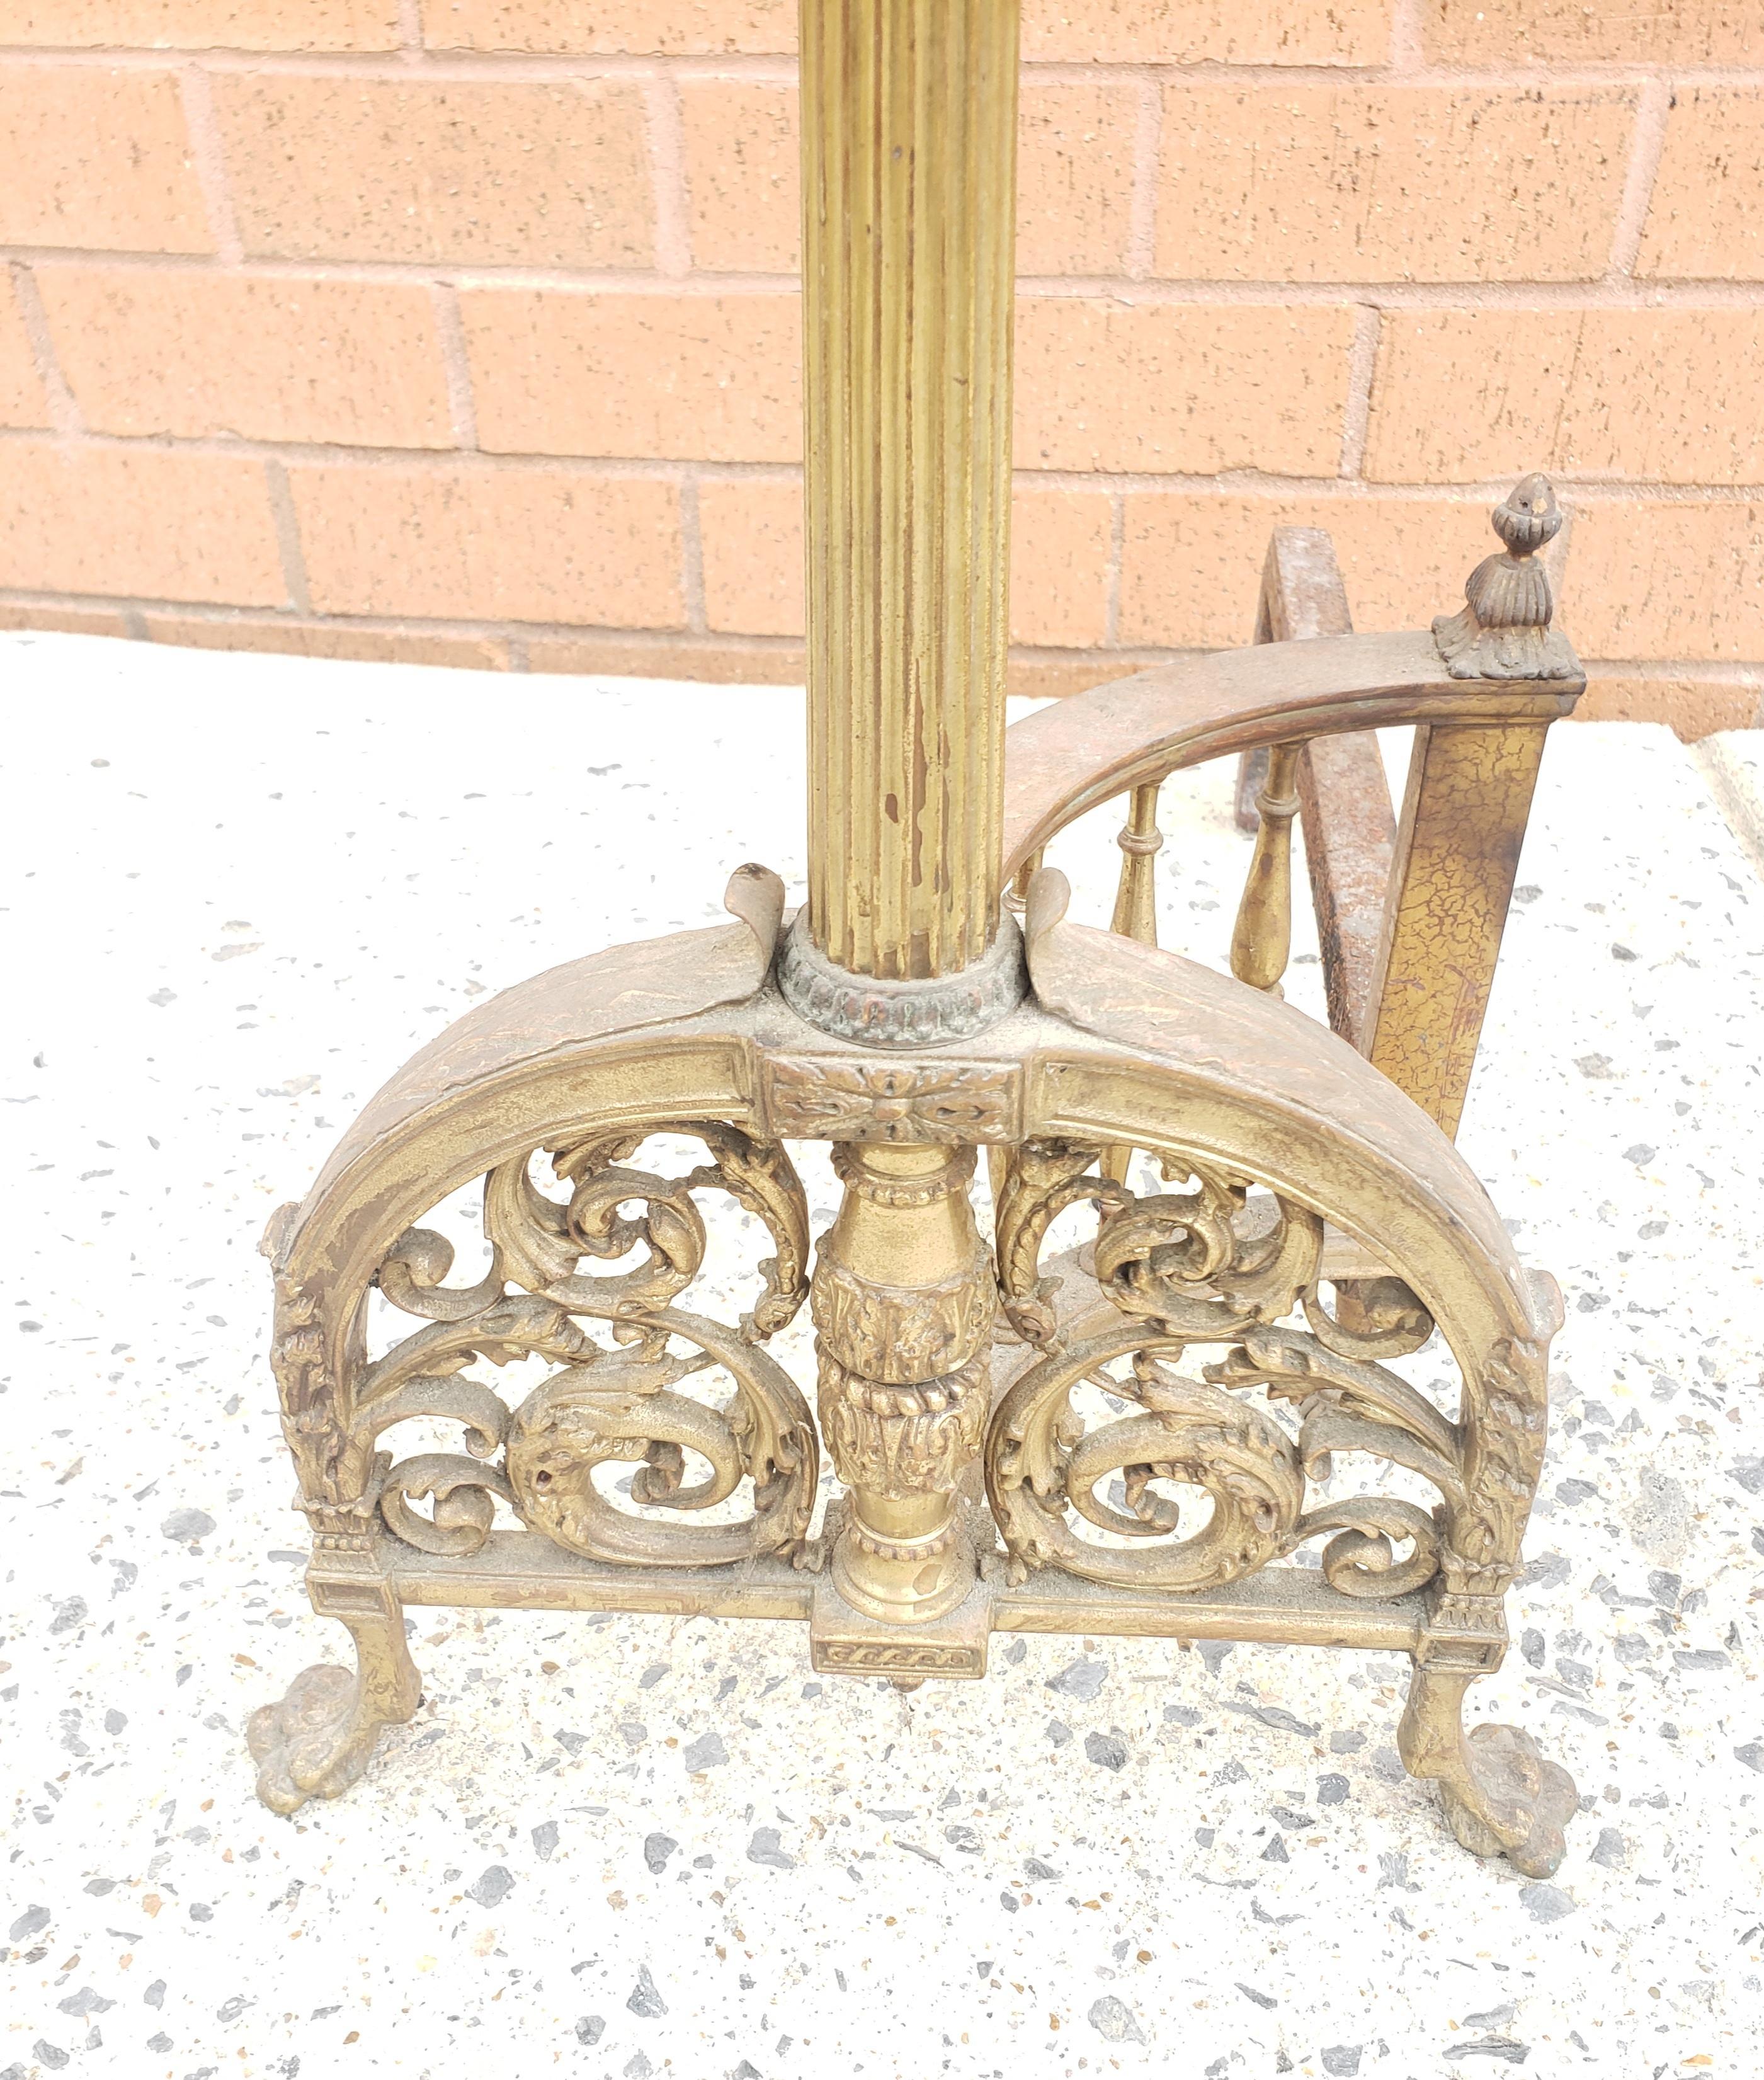 Neoclassical Revival Early 20th Century Tall French Empire Brass and Iron Andirons, Pair For Sale